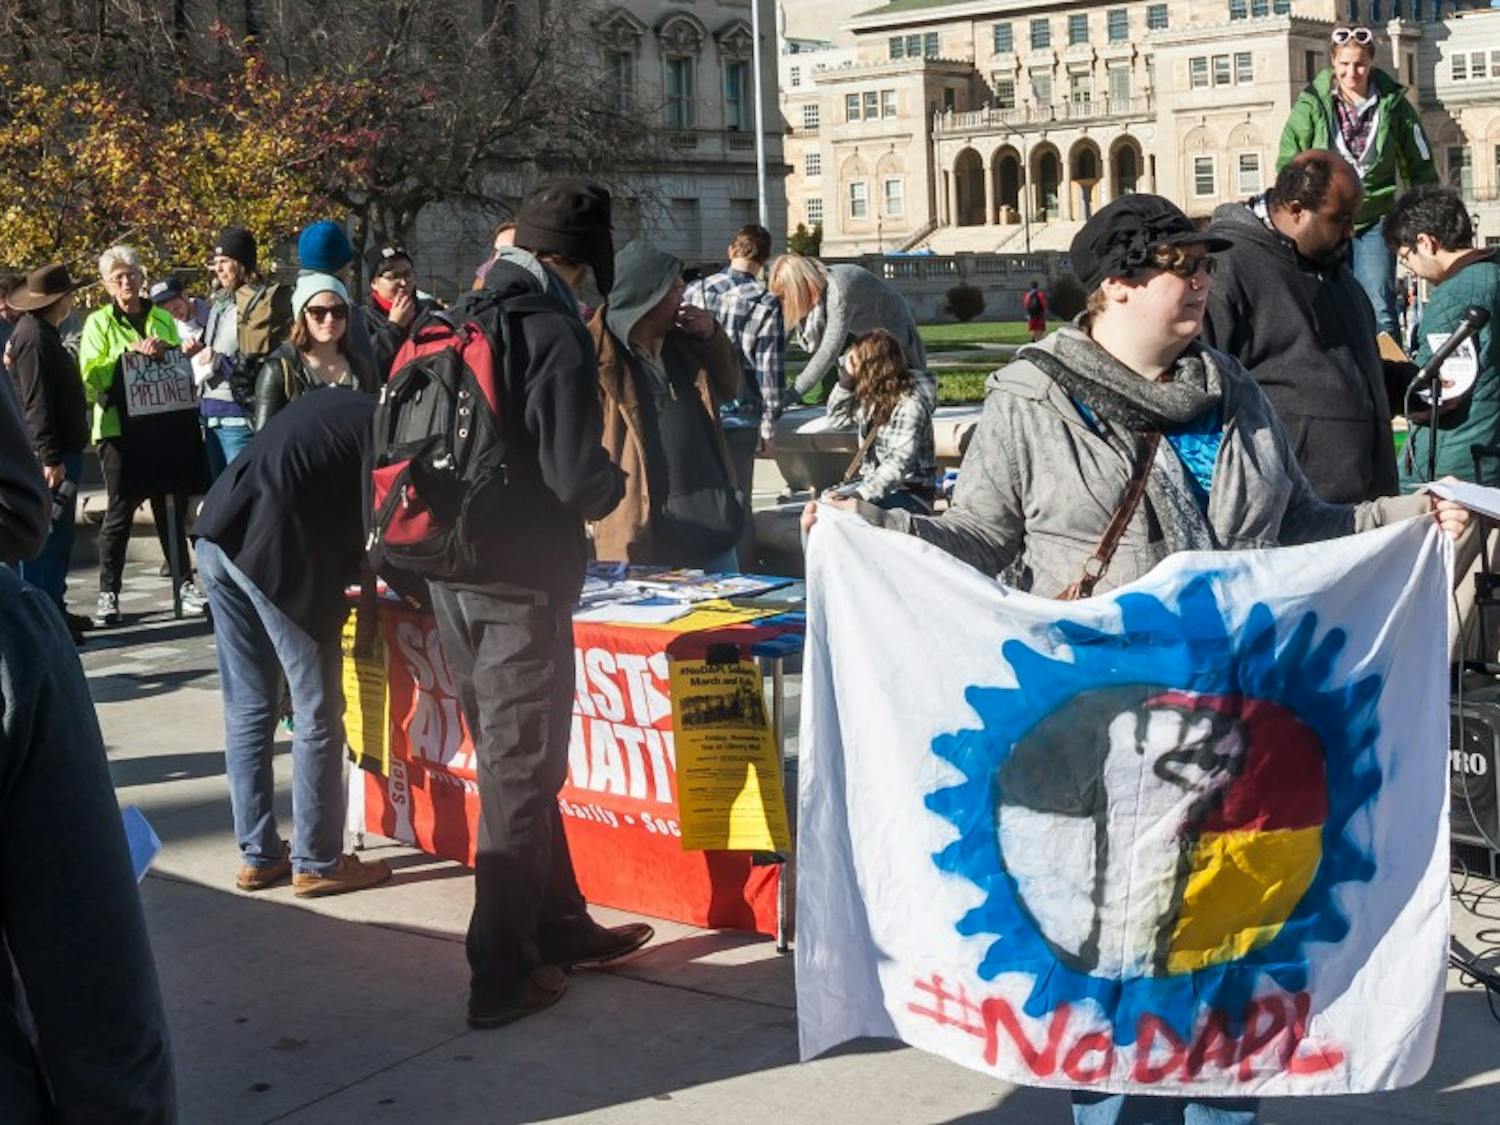 Several UW-Madison student organizations that participated in activism against the Dakota Access pipeline refuse to stop fighting for the cause following the news that discussions will be held to move the construction.